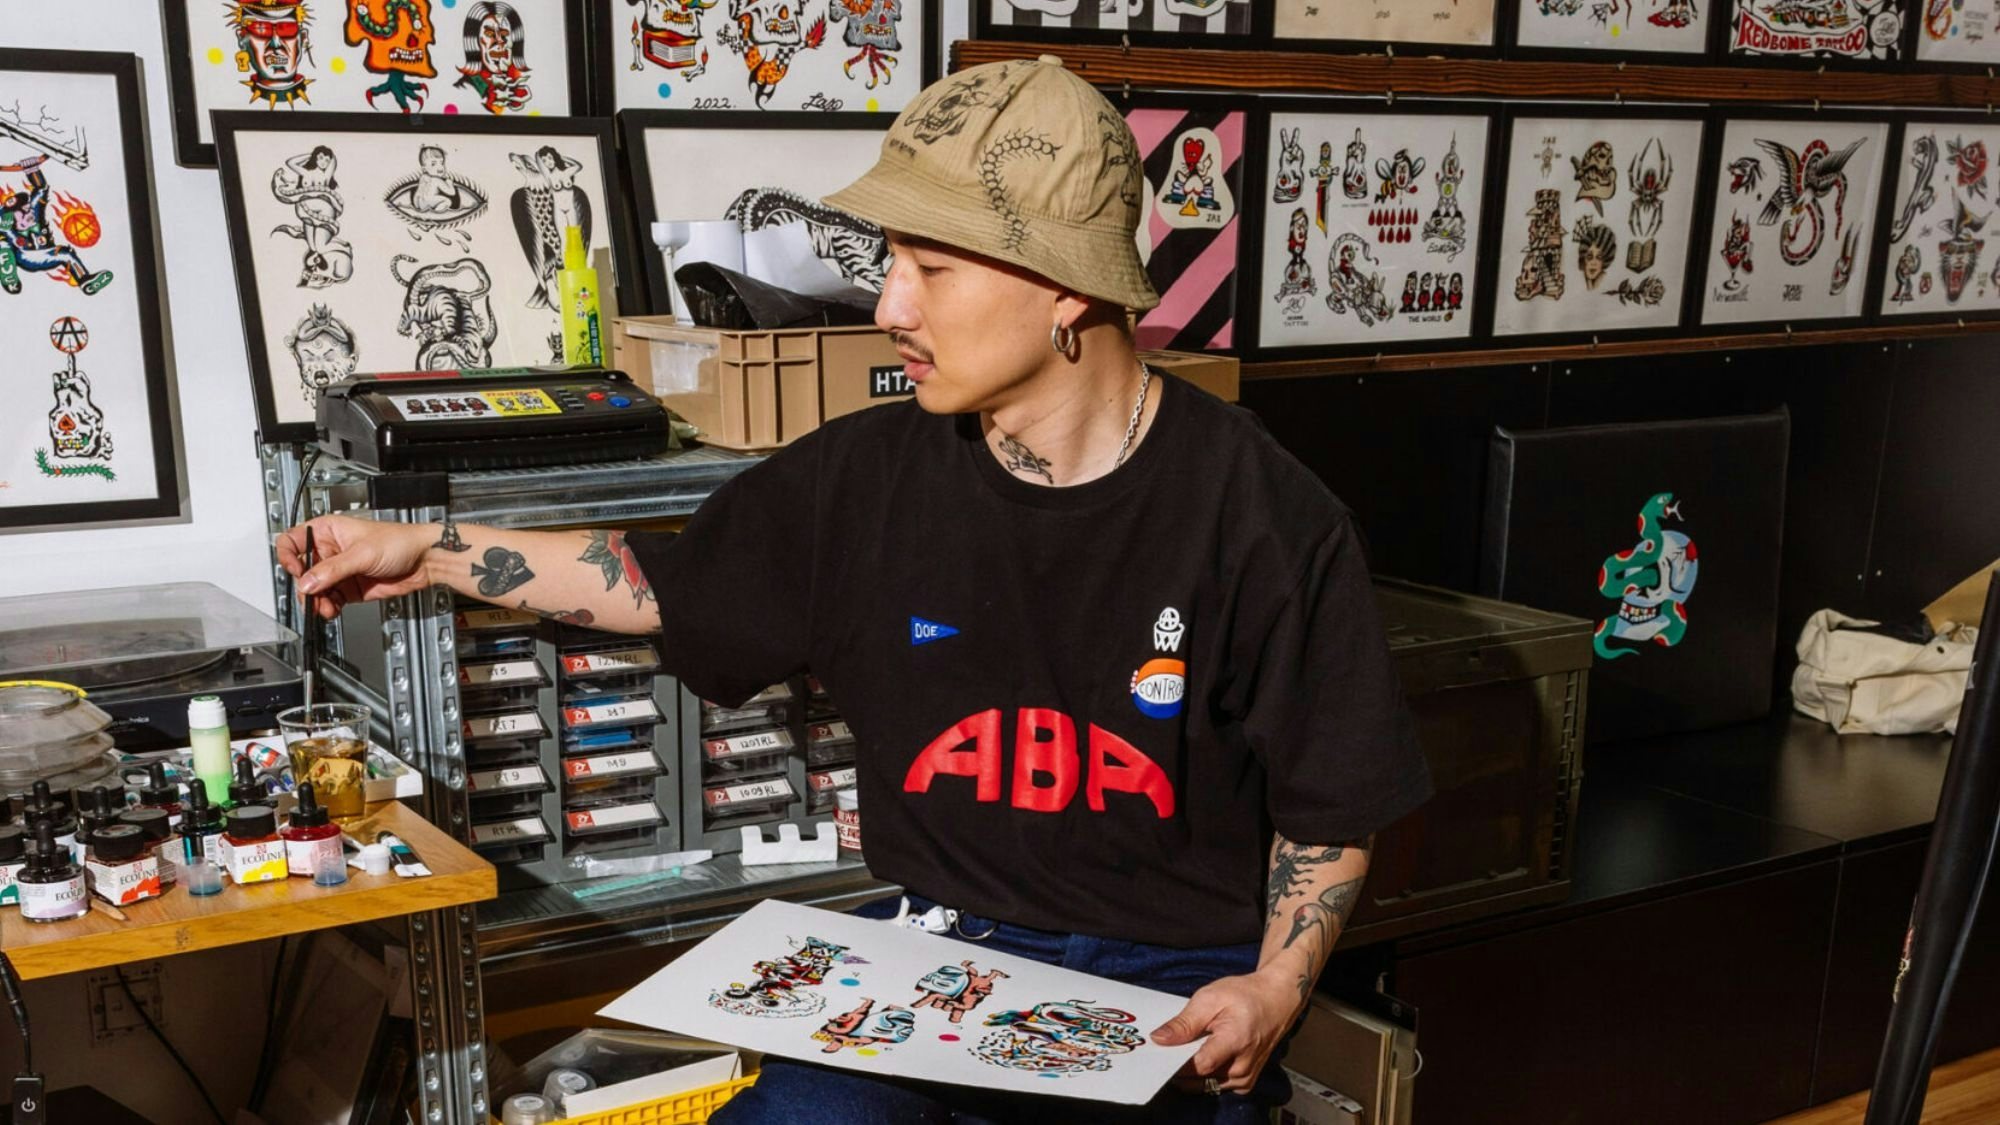 As a tattoo artist, Jax's work naturally crosses into the streetwear space, making a collaboration with Doe Shanghai a great match. Photo: Doe Shanghai